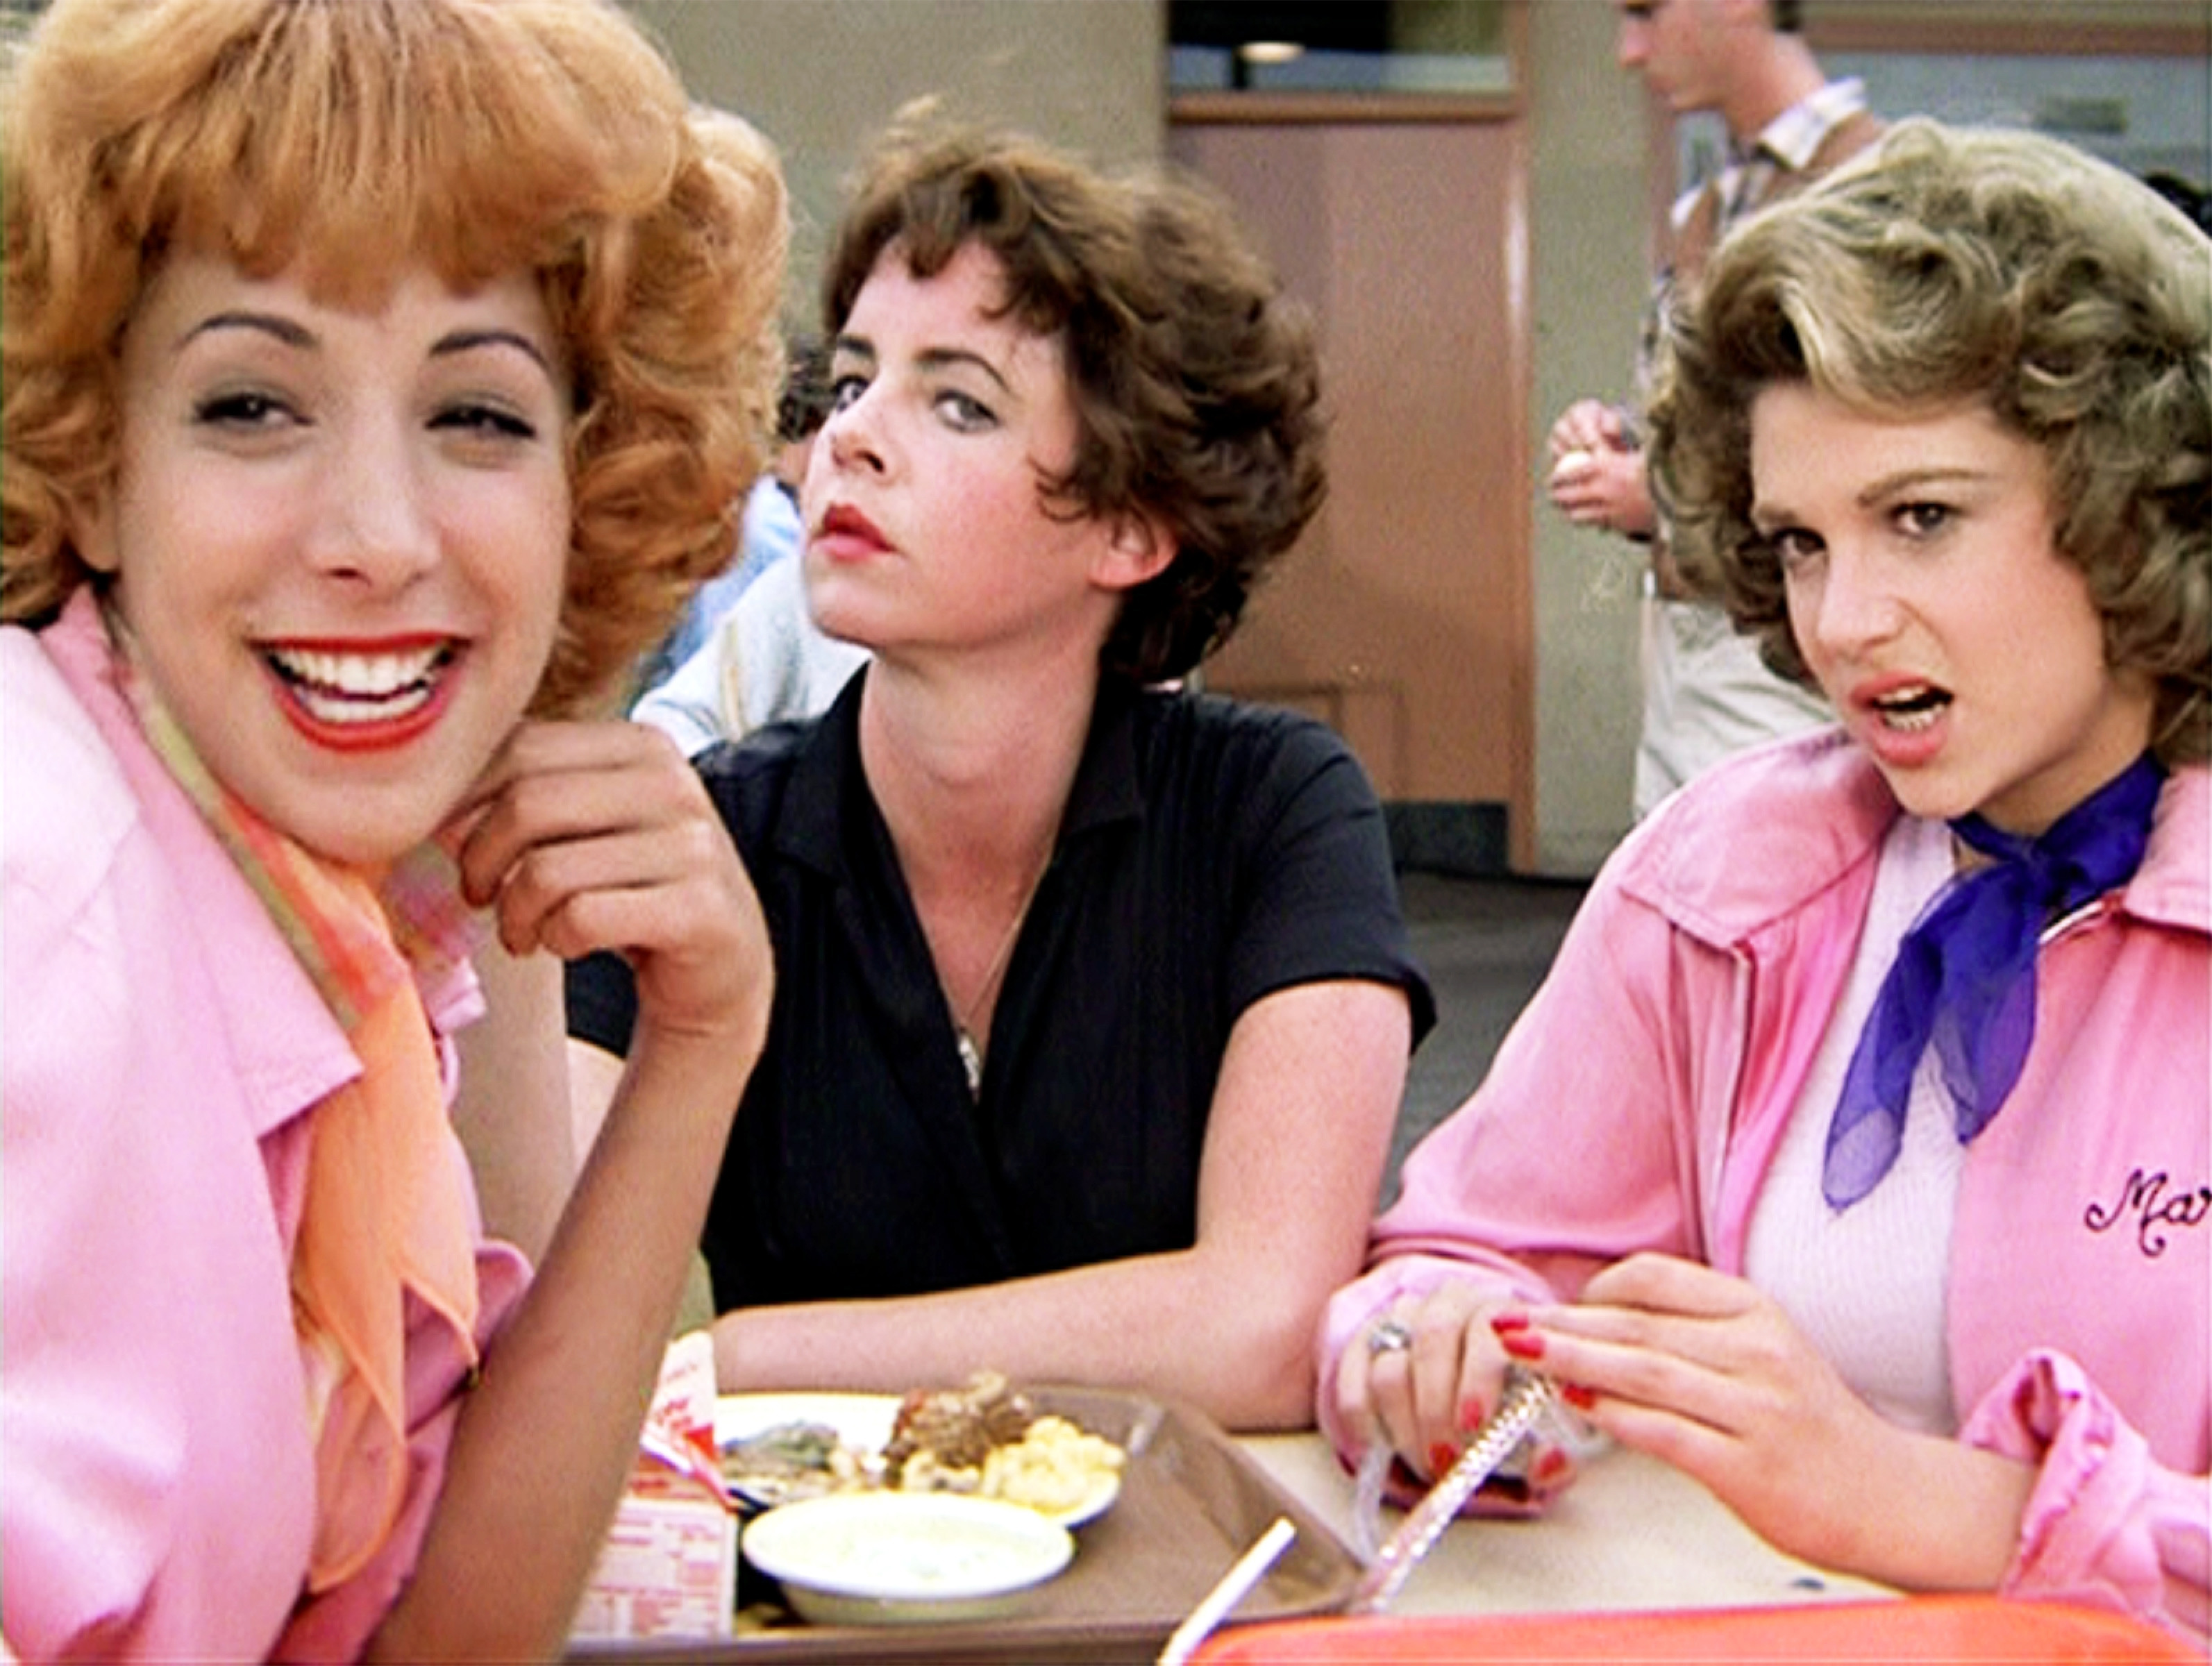 (L-R) Didi Conn as Frenchy, Stockard Channing as Betty Rizzo and Dinah Manoff as Marty Maraschino in the movie "Grease" on June 16, 1978 | Source: Getty Images